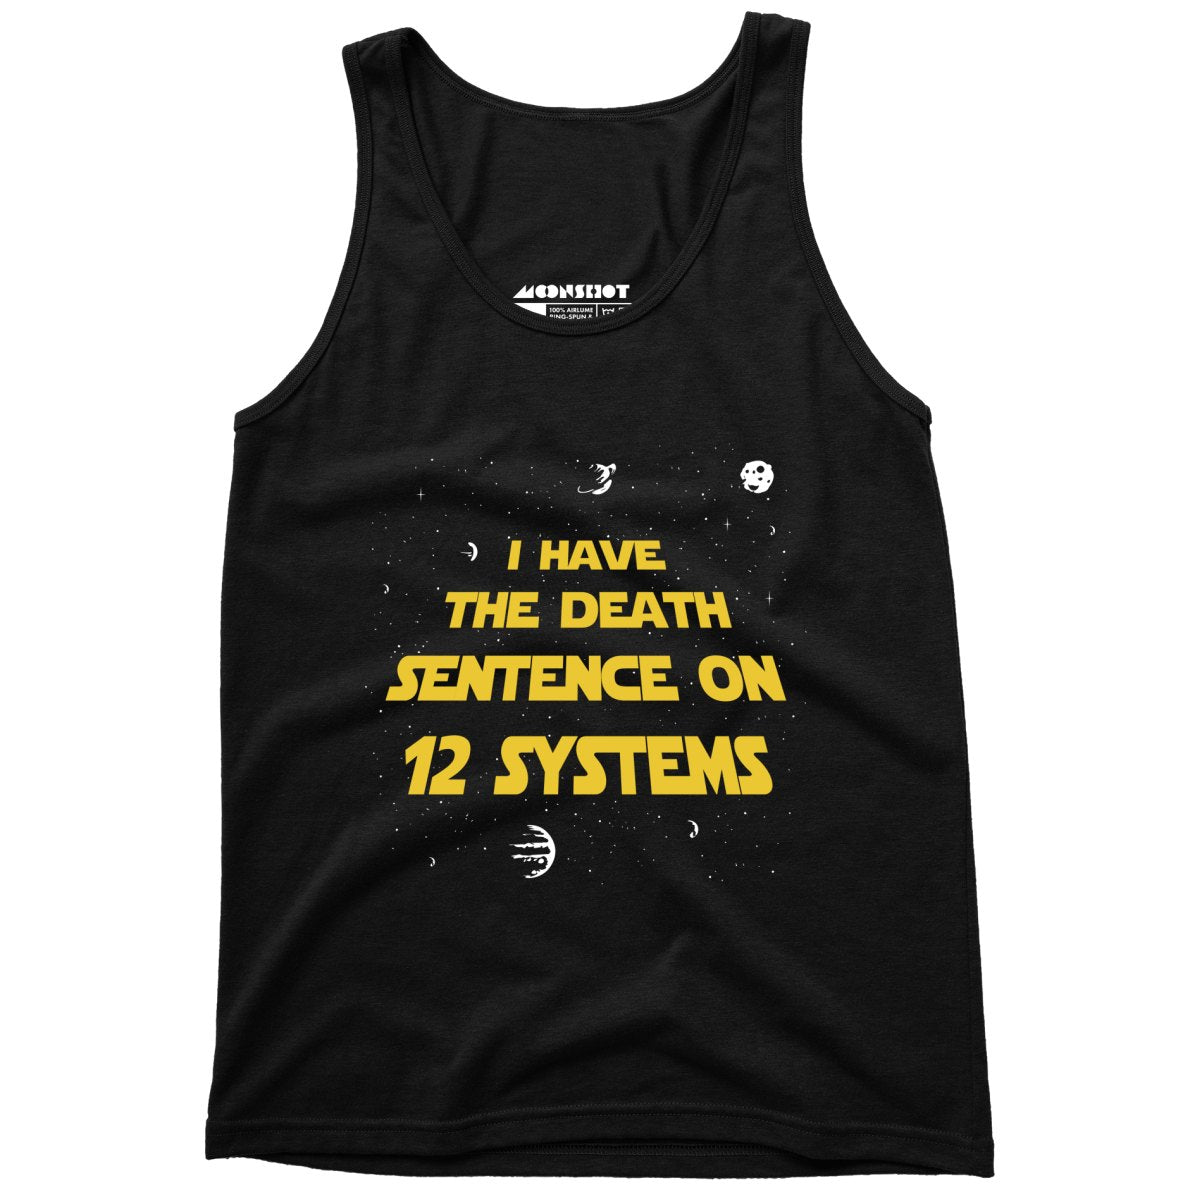 I Have the Death Sentence on 12 Systems v2 - Unisex Tank Top